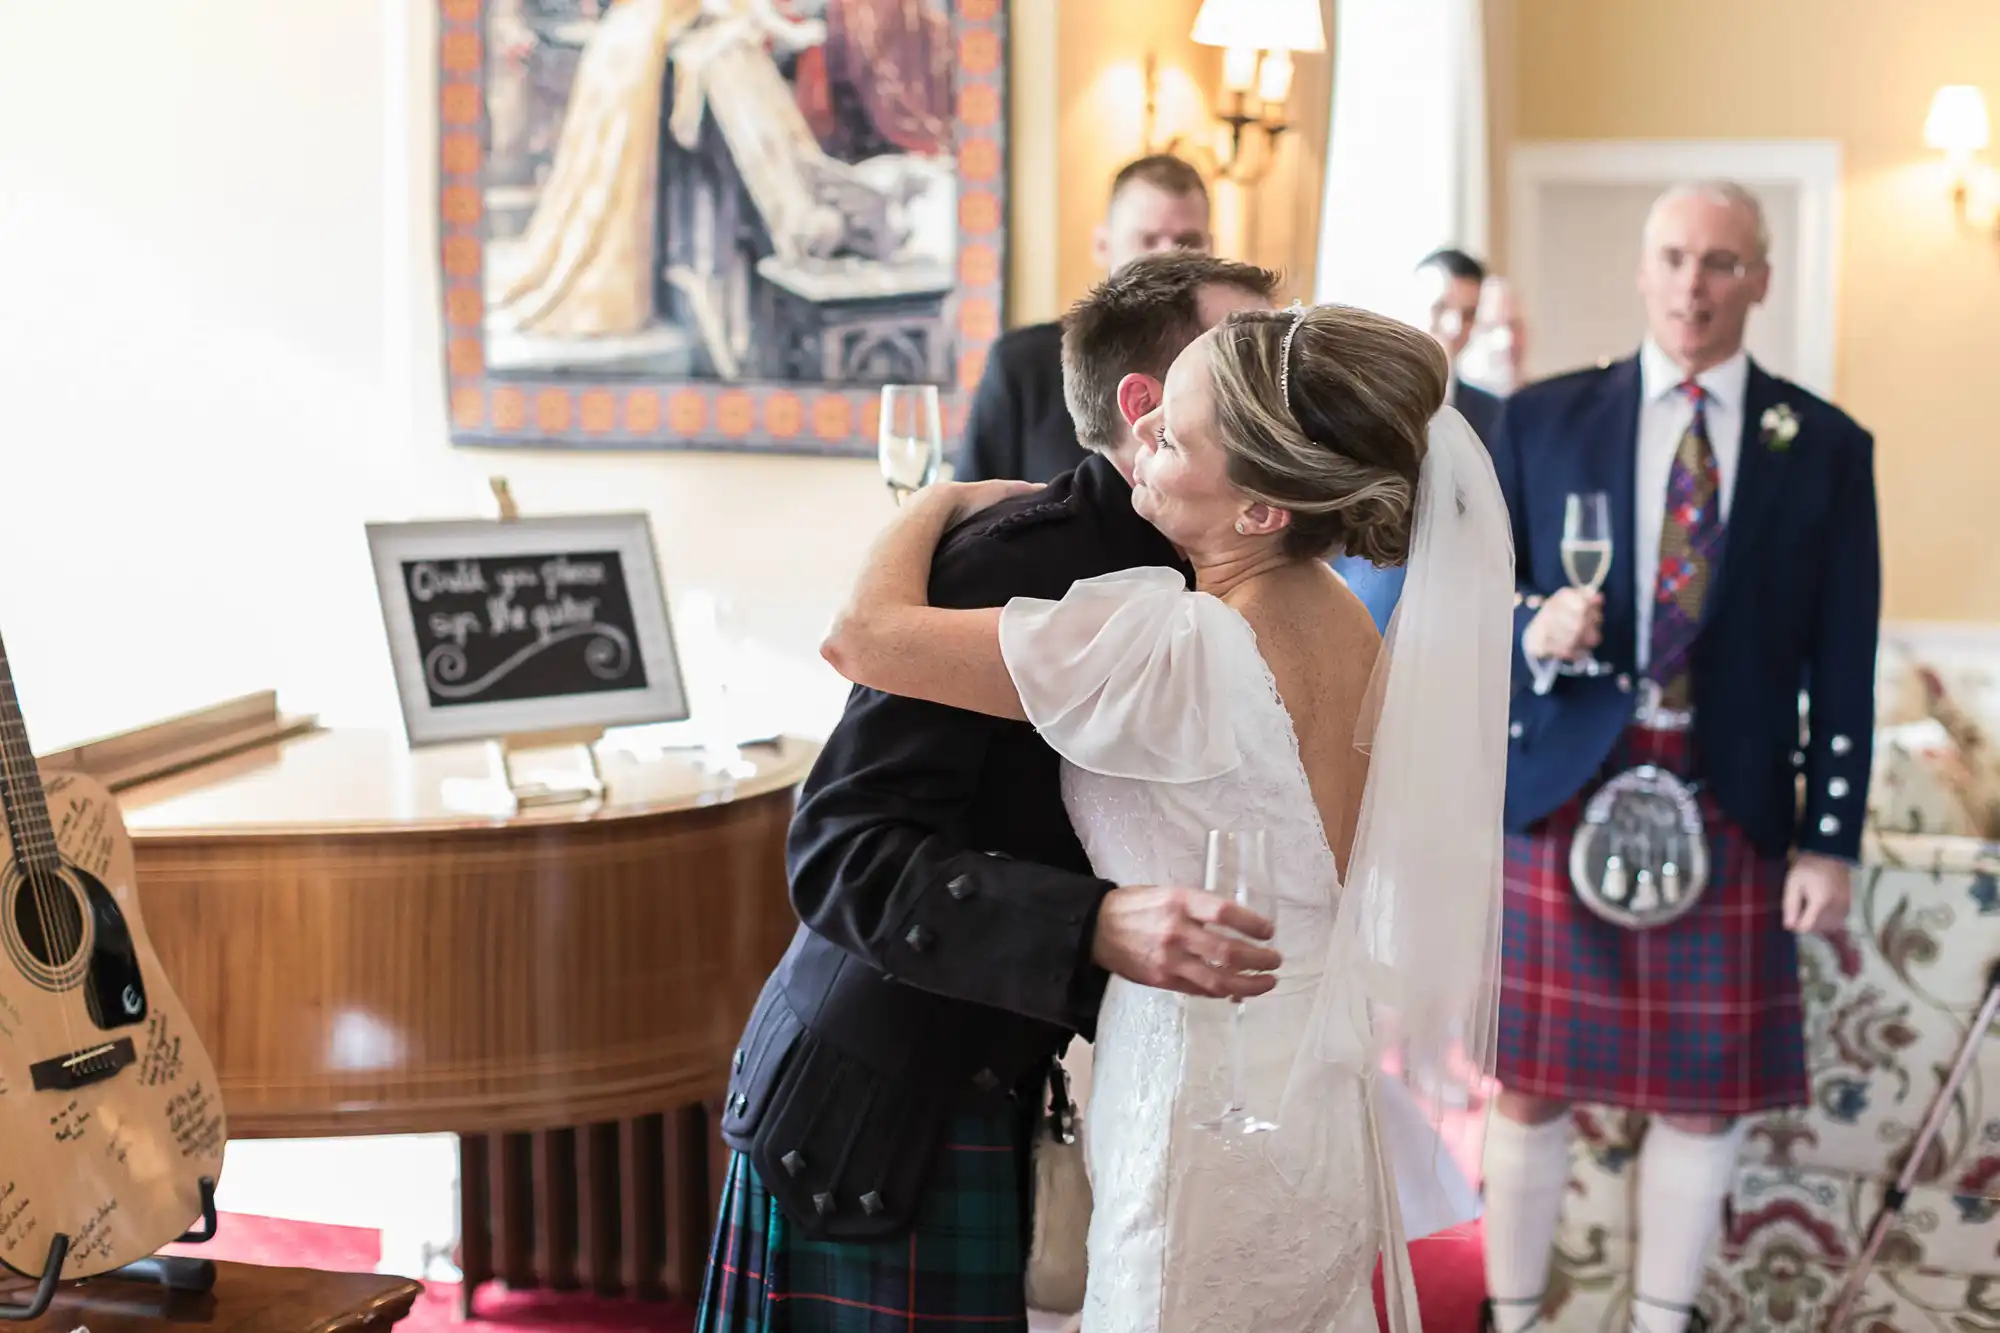 A bride in a white dress and a groom in a kilt embrace warmly, surrounded by wedding guests in a decorated room.